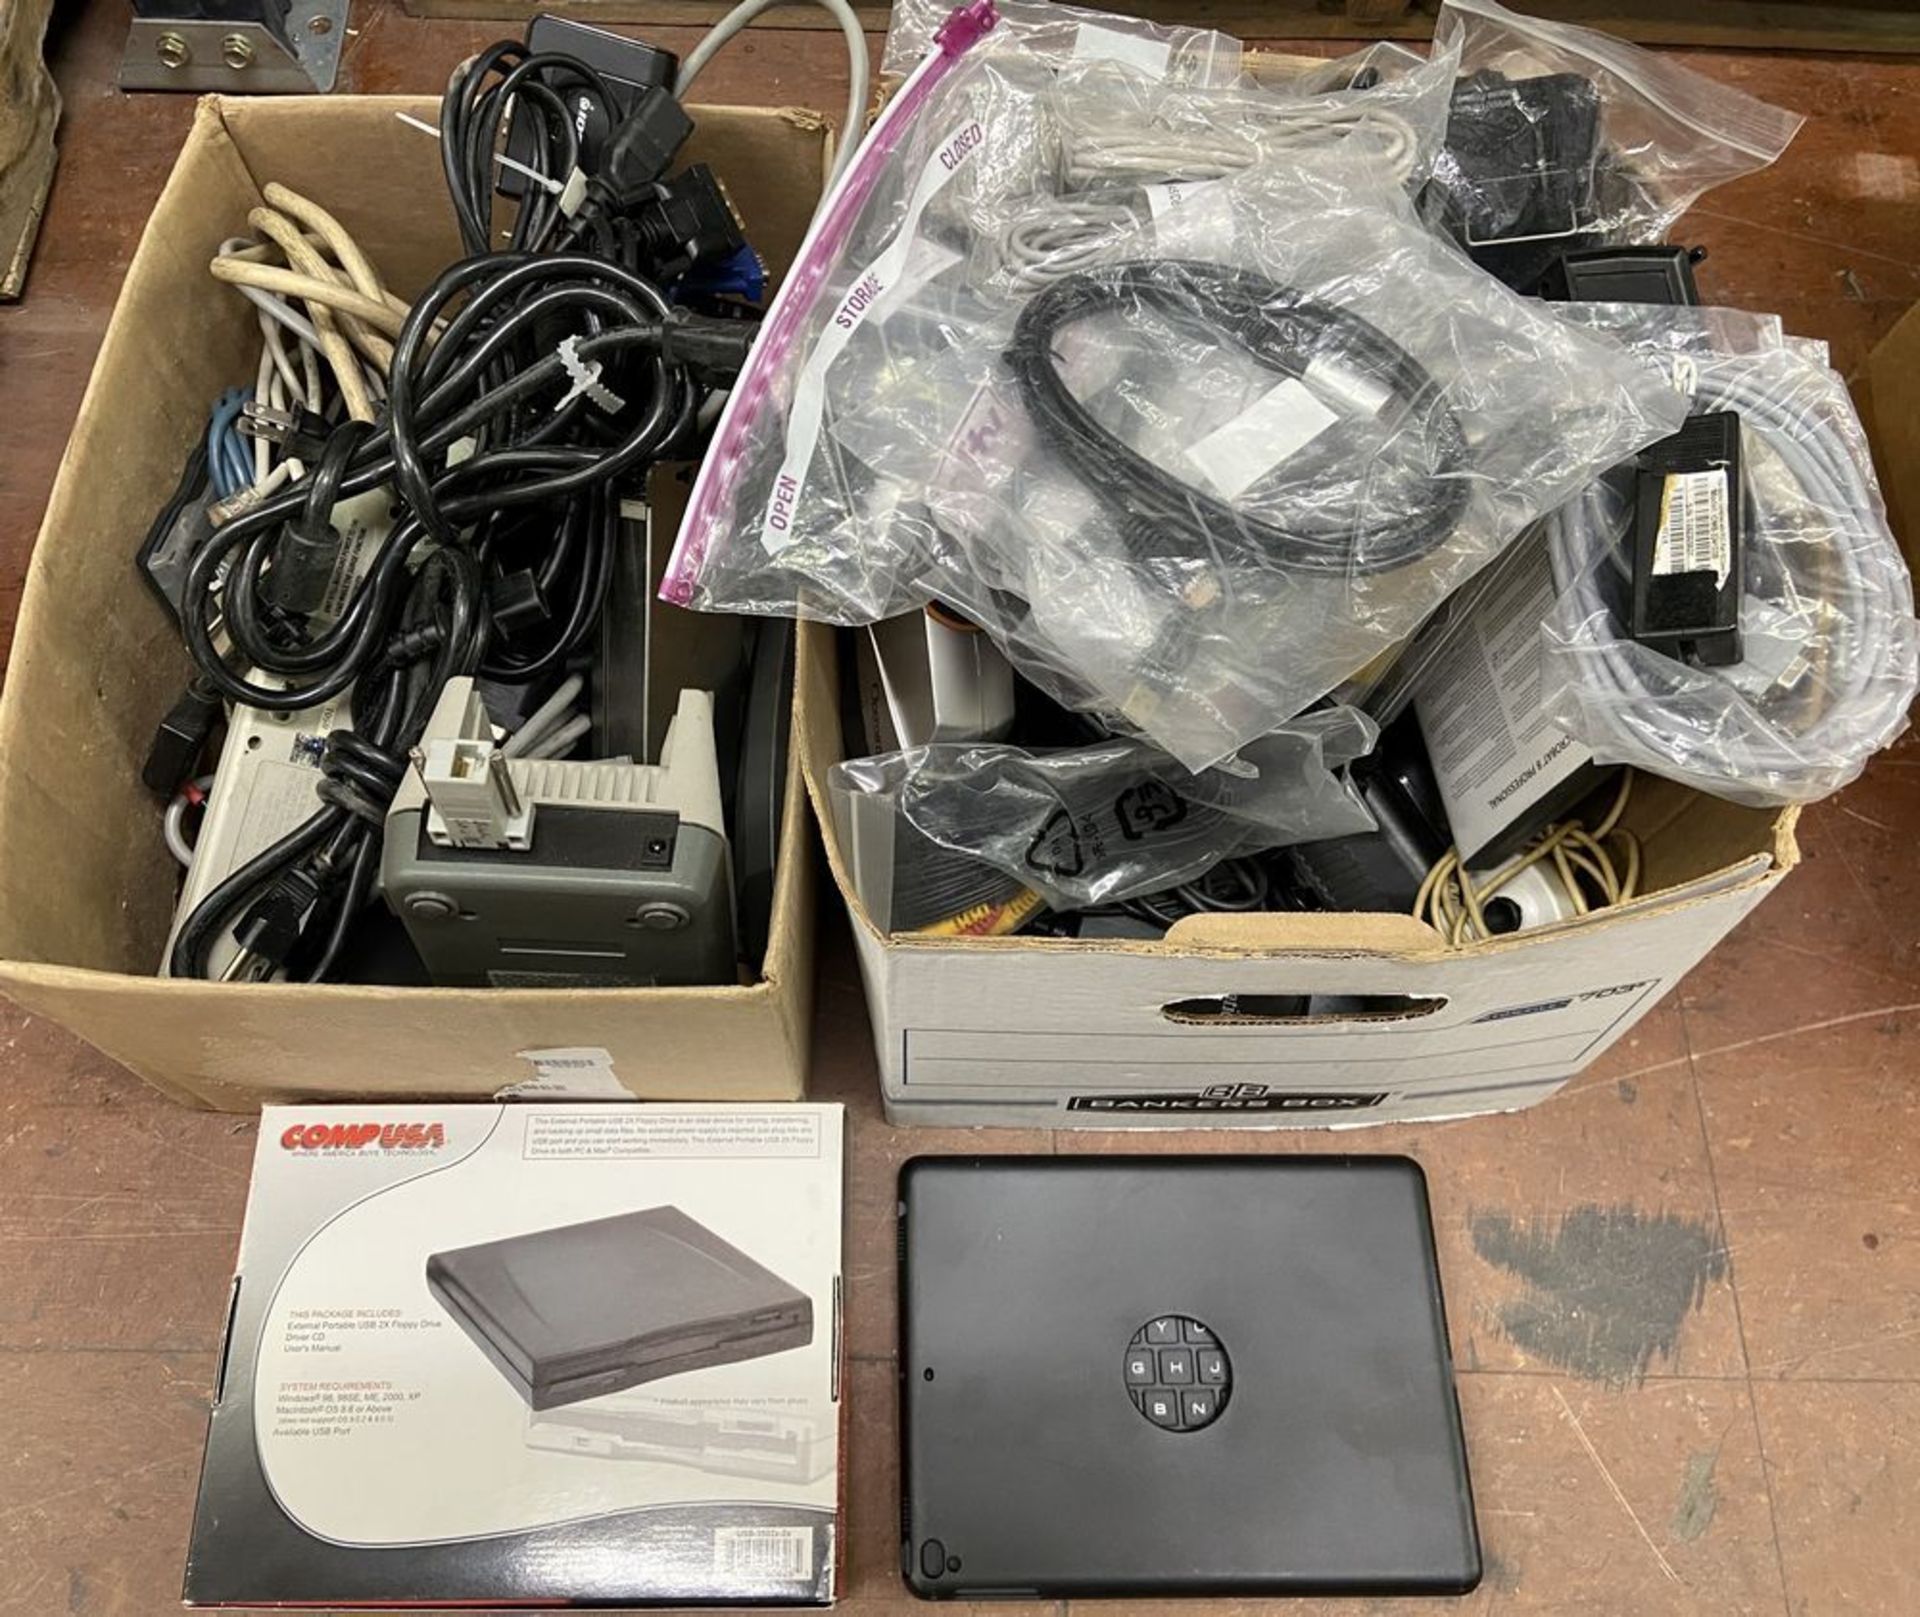 Mixed Lot of Retail Electronics including: Comp USA Floppy drive, Tablet Keyboard Case, Misc